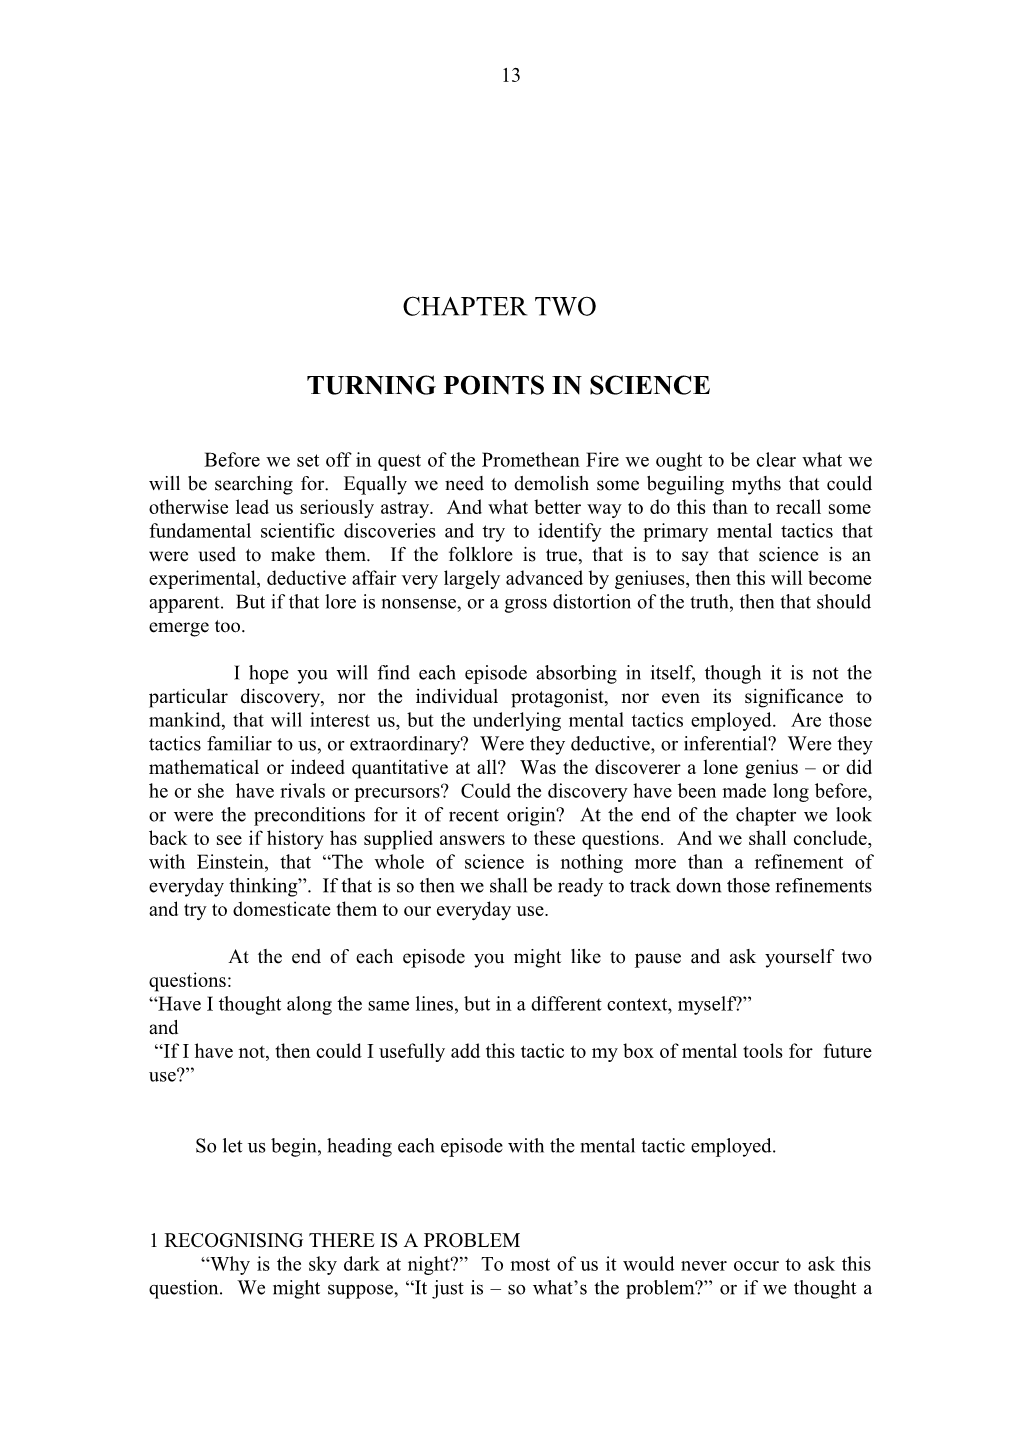 Turning Points in Science